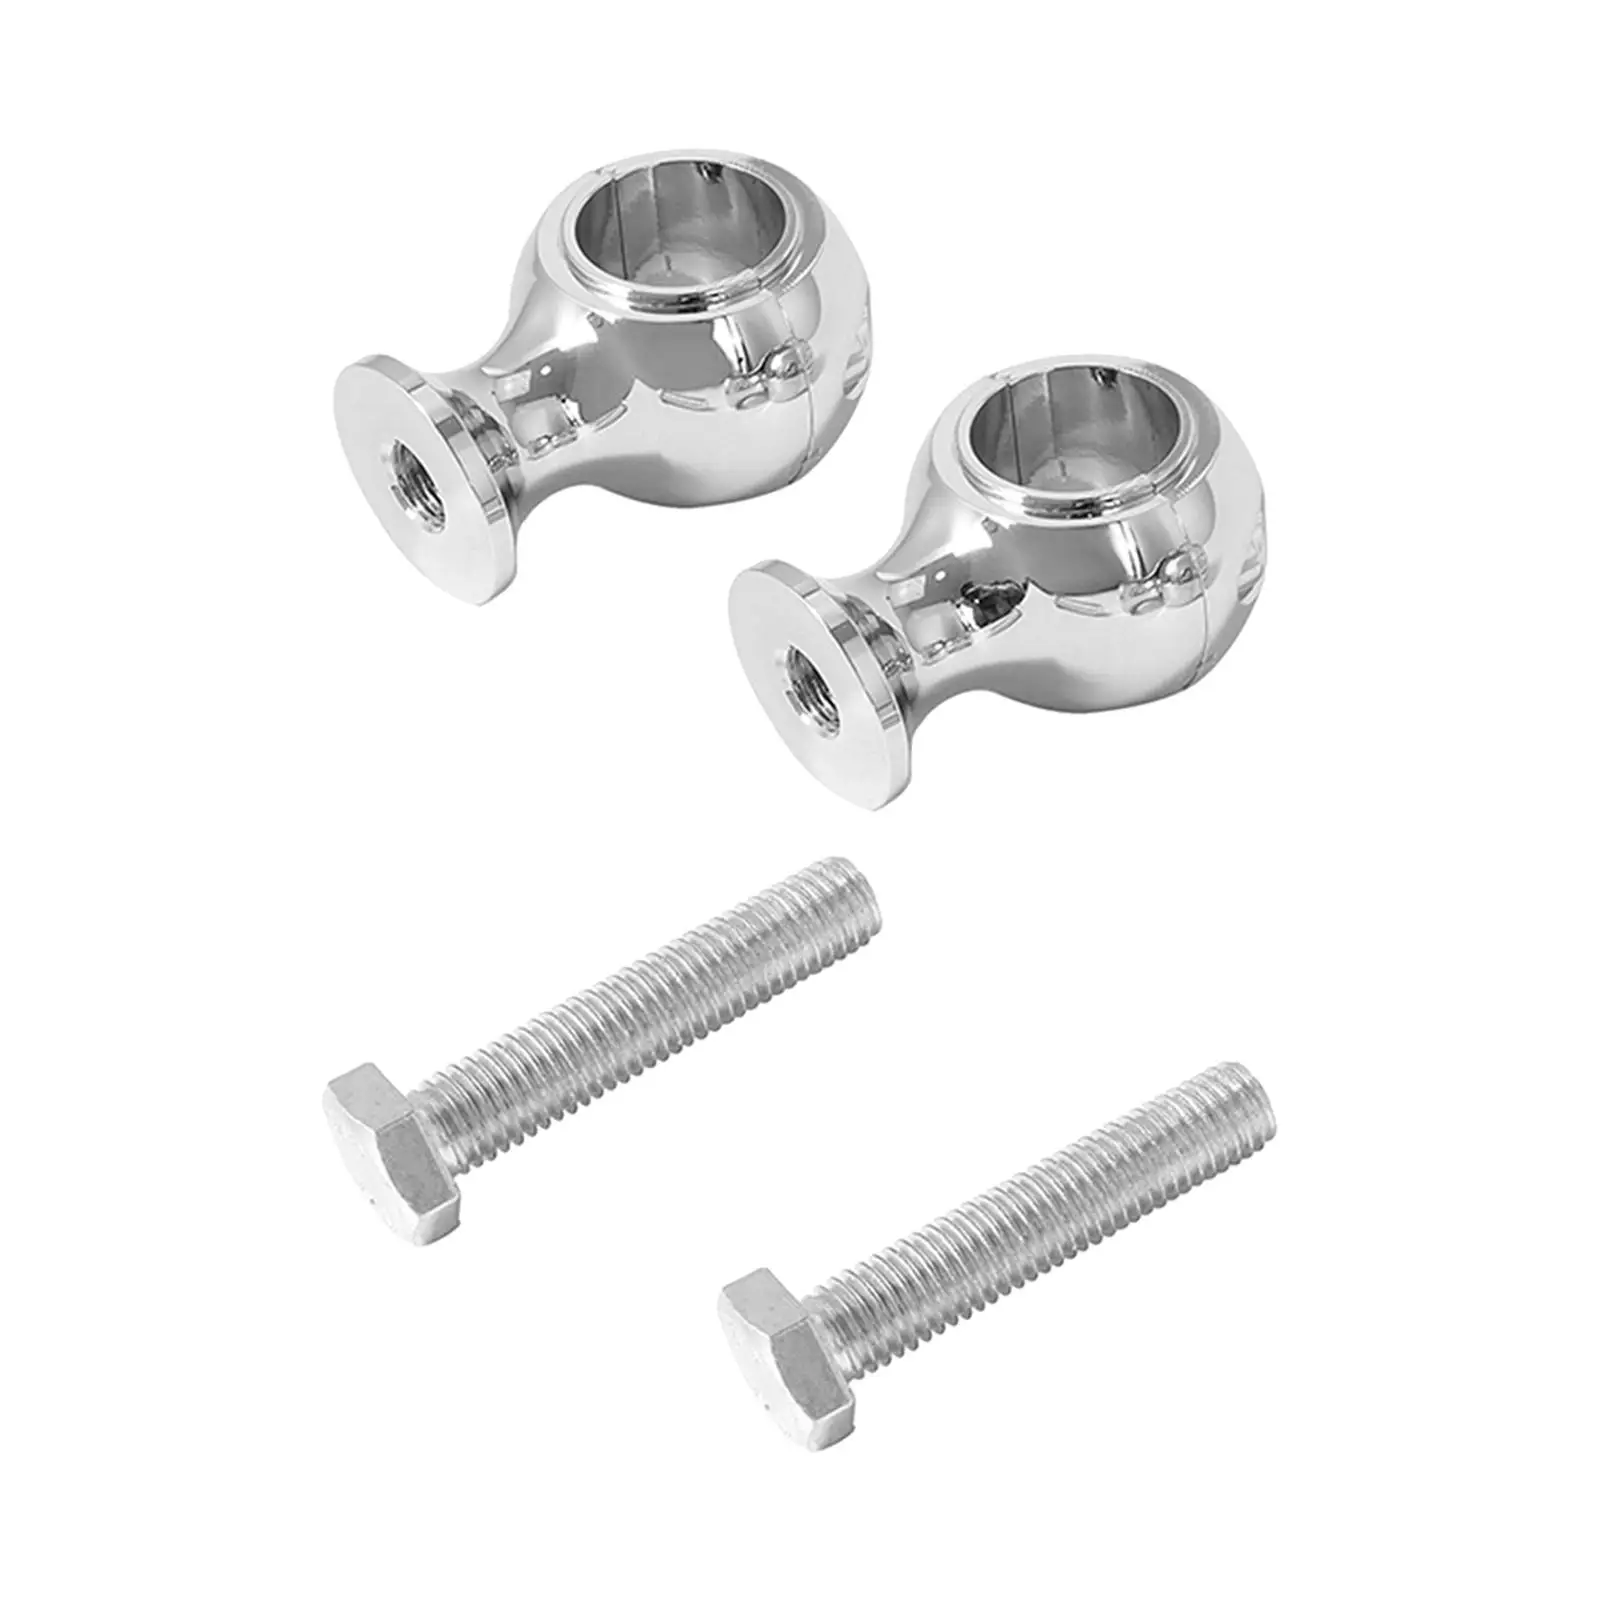 Motorcycle Handlebar Risers 25mm High Performance Replacement Motorcycle Bar Mount Clamps for Harley Other Handlebar